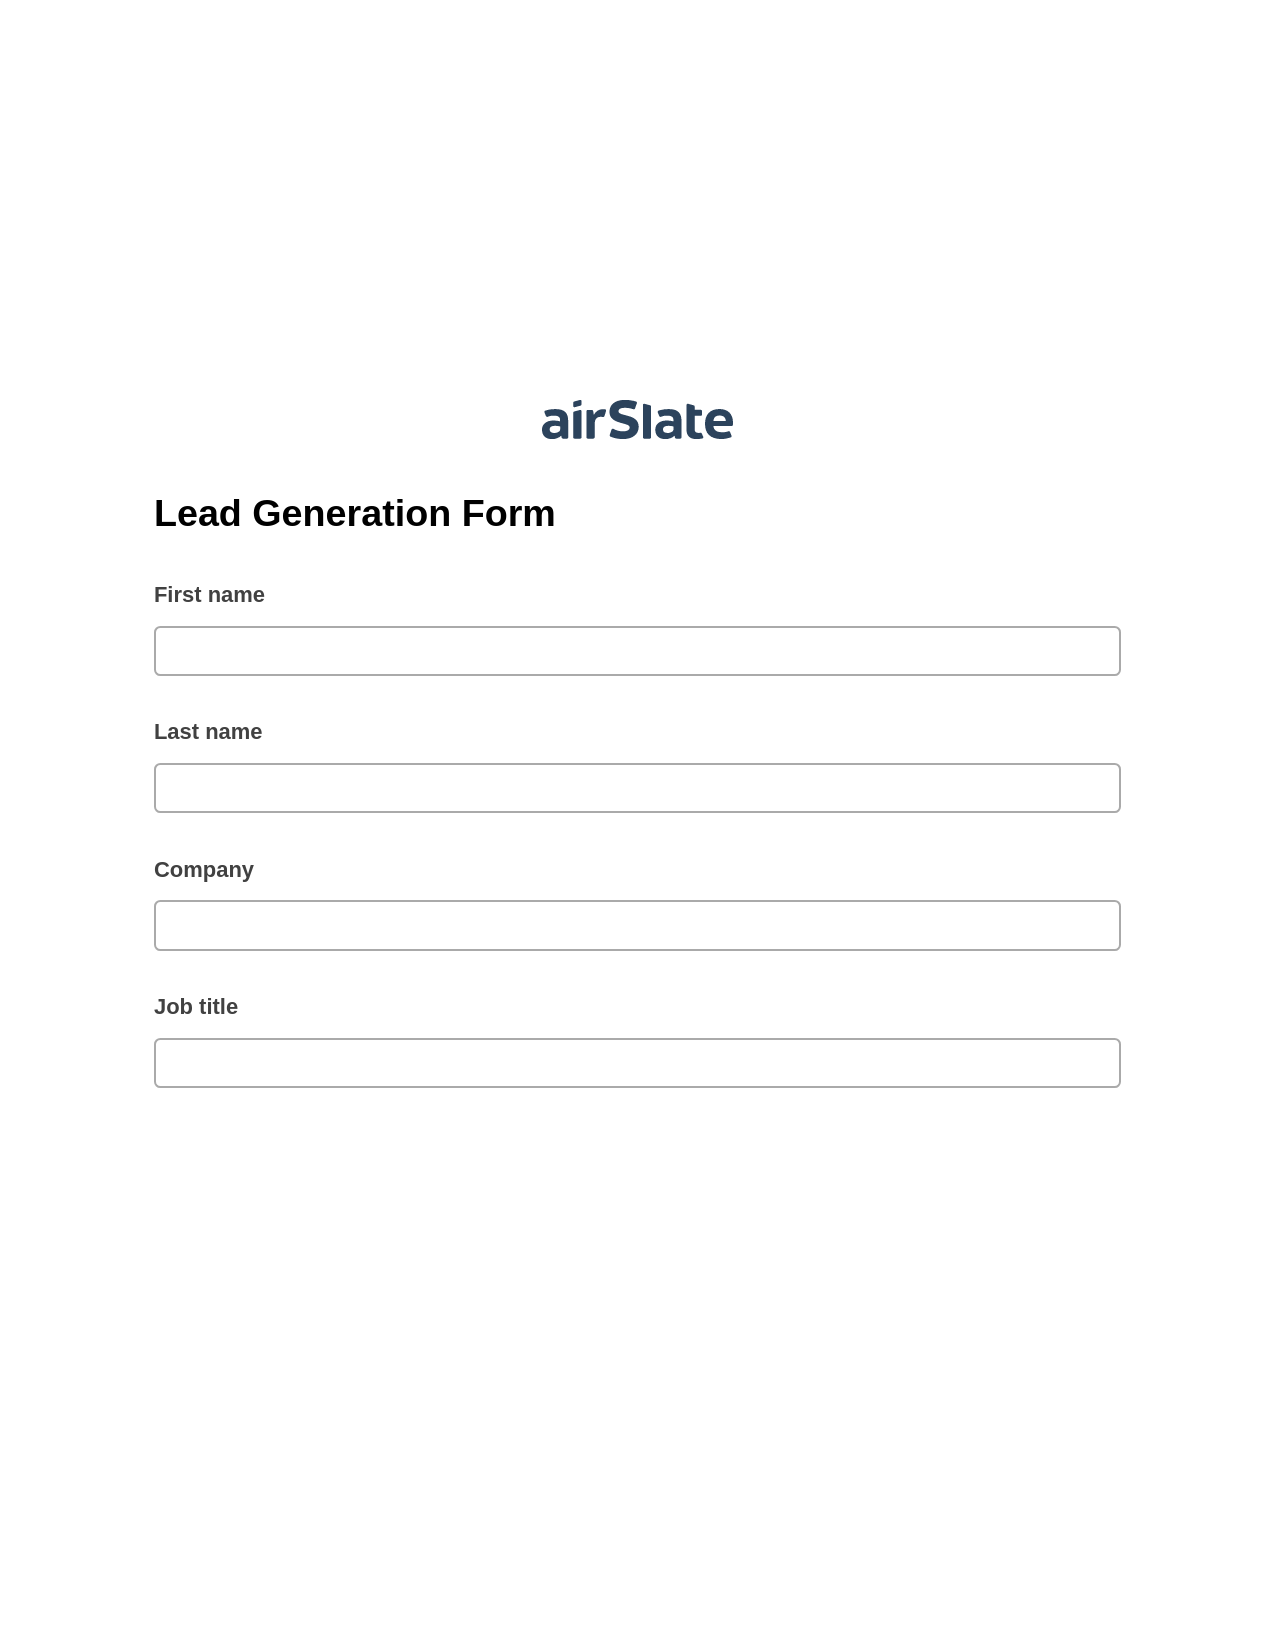 Lead Generation Form Pre-fill from MS Dynamics 365 Records, Create slate addon, Archive to OneDrive Bot